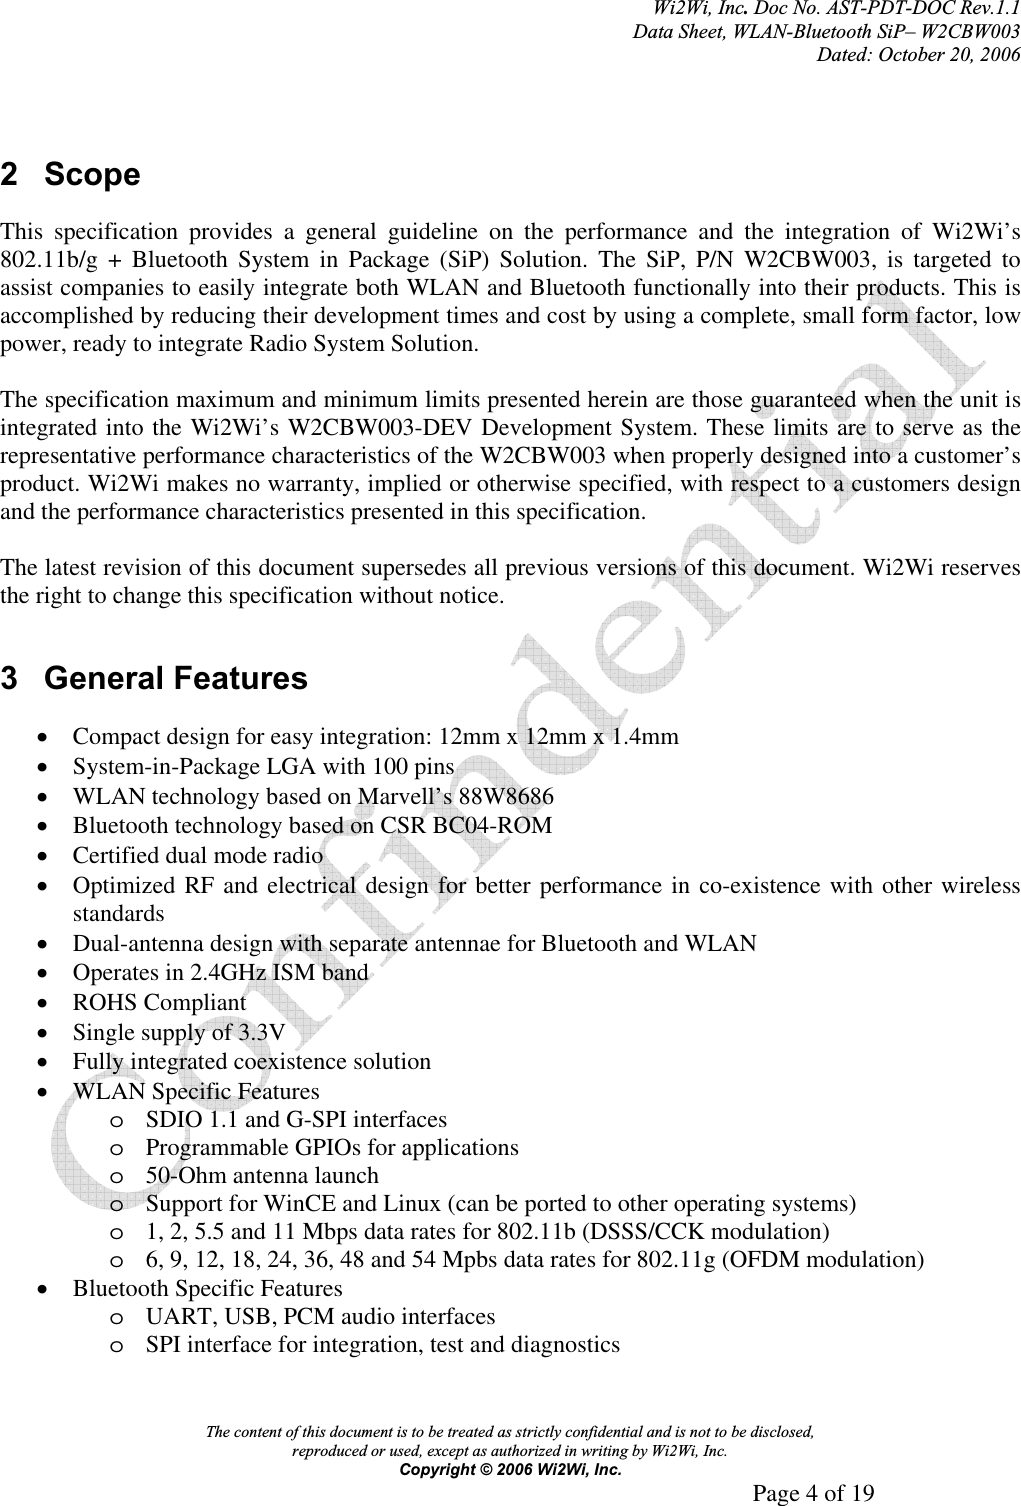 Wi2Wi, Inc.Doc No. AST-PDT-DOC Rev.1.1  Data Sheet, WLAN-Bluetooth SiP– W2CBW003 Dated: October 20, 2006 The content of this document is to be treated as strictly confidential and is not to be disclosed,  reproduced or used, except as authorized in writing by Wi2Wi, Inc.  Copyright © 2006 Wi2Wi, Inc.     Page 4 of 19   2 Scope This specification provides a general guideline on the performance and the integration of Wi2Wi’s  802.11b/g + Bluetooth System in Package (SiP) Solution. The SiP, P/N W2CBW003, is targeted to assist companies to easily integrate both WLAN and Bluetooth functionally into their products. This is accomplished by reducing their development times and cost by using a complete, small form factor, low power, ready to integrate Radio System Solution. The specification maximum and minimum limits presented herein are those guaranteed when the unit is integrated into the Wi2Wi’s W2CBW003-DEV Development System. These limits are to serve as the representative performance characteristics of the W2CBW003 when properly designed into a customer’s product. Wi2Wi makes no warranty, implied or otherwise specified, with respect to a customers design and the performance characteristics presented in this specification. The latest revision of this document supersedes all previous versions of this document. Wi2Wi reserves the right to change this specification without notice. 3 General Features xCompact design for easy integration: 12mm x 12mm x 1.4mm xSystem-in-Package LGA with 100 pins xWLAN technology based on Marvell’s 88W8686 xBluetooth technology based on CSR BC04-ROM xCertified dual mode radio xOptimized RF and electrical design for better performance in co-existence with other wireless standards xDual-antenna design with separate antennae for Bluetooth and WLAN xOperates in 2.4GHz ISM band xROHS Compliant xSingle supply of 3.3V xFully integrated coexistence solution xWLAN Specific Features oSDIO 1.1 and G-SPI interfaces oProgrammable GPIOs for applications o50-Ohm antenna launch oSupport for WinCE and Linux (can be ported to other operating systems) o1, 2, 5.5 and 11 Mbps data rates for 802.11b (DSSS/CCK modulation) o6, 9, 12, 18, 24, 36, 48 and 54 Mpbs data rates for 802.11g (OFDM modulation) xBluetooth Specific Features oUART, USB, PCM audio interfaces oSPI interface for integration, test and diagnostics 